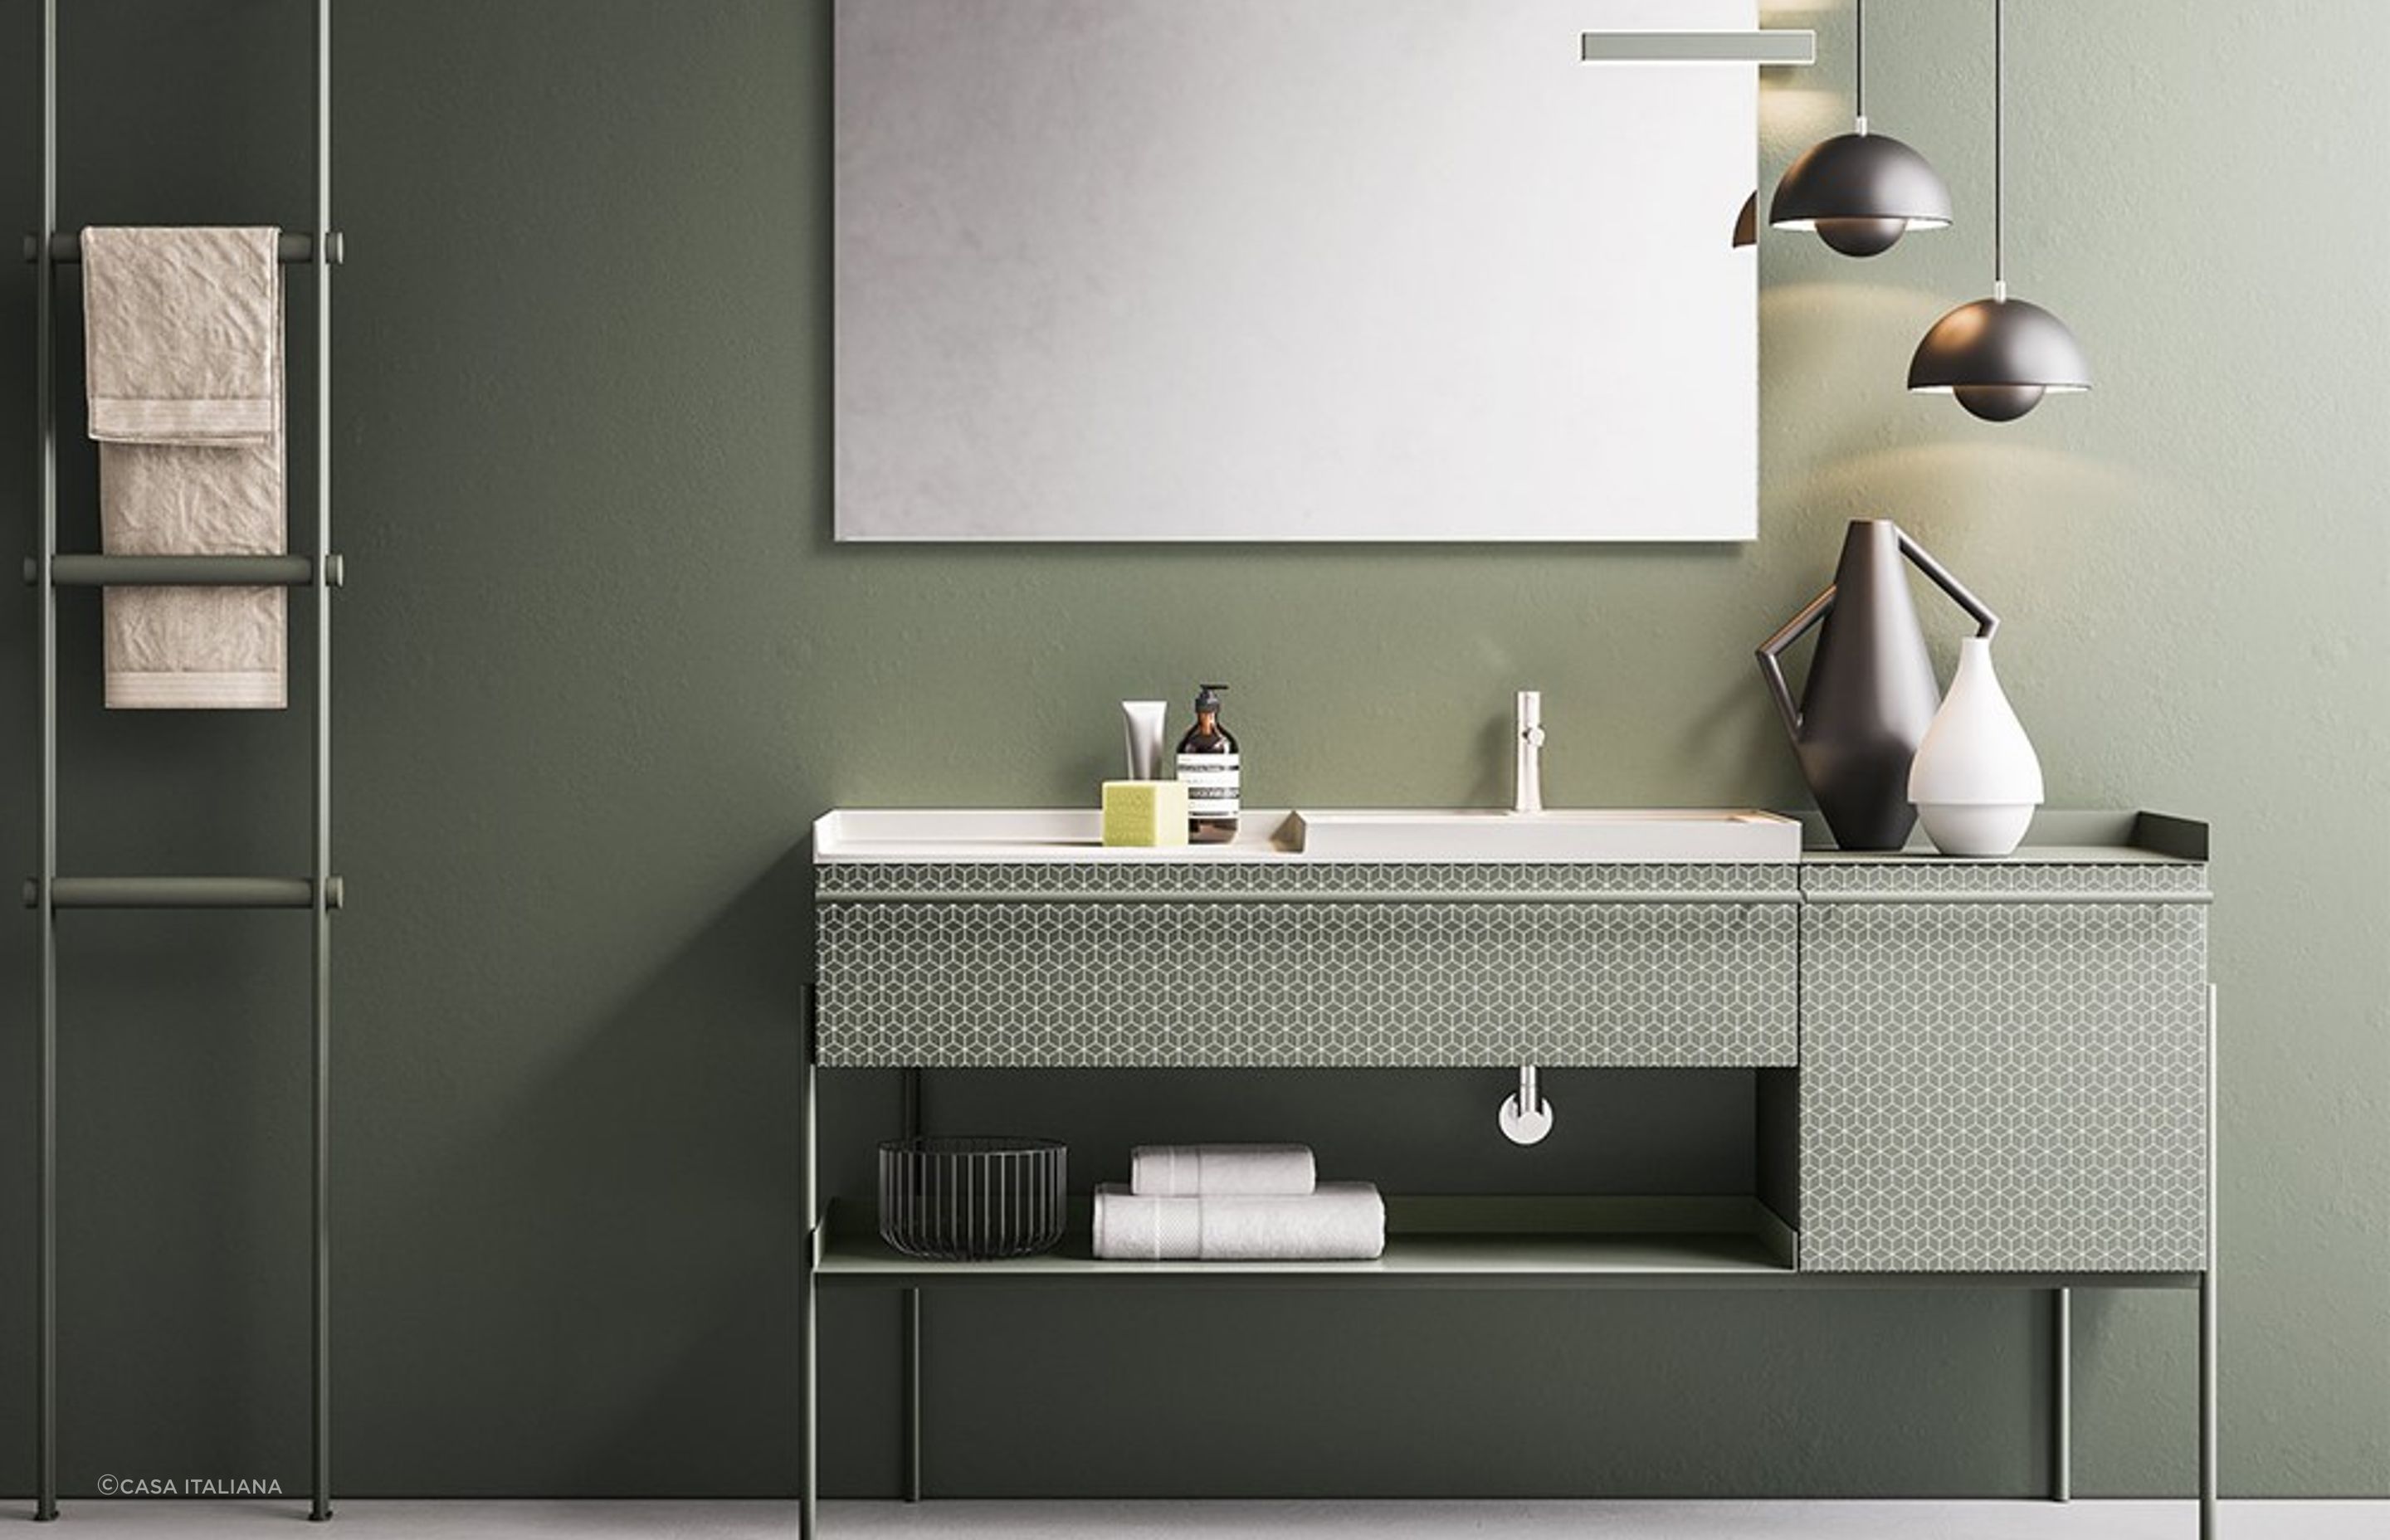 The Industrial Vanity by Ardeco captures this contemporary interior style perfectly.